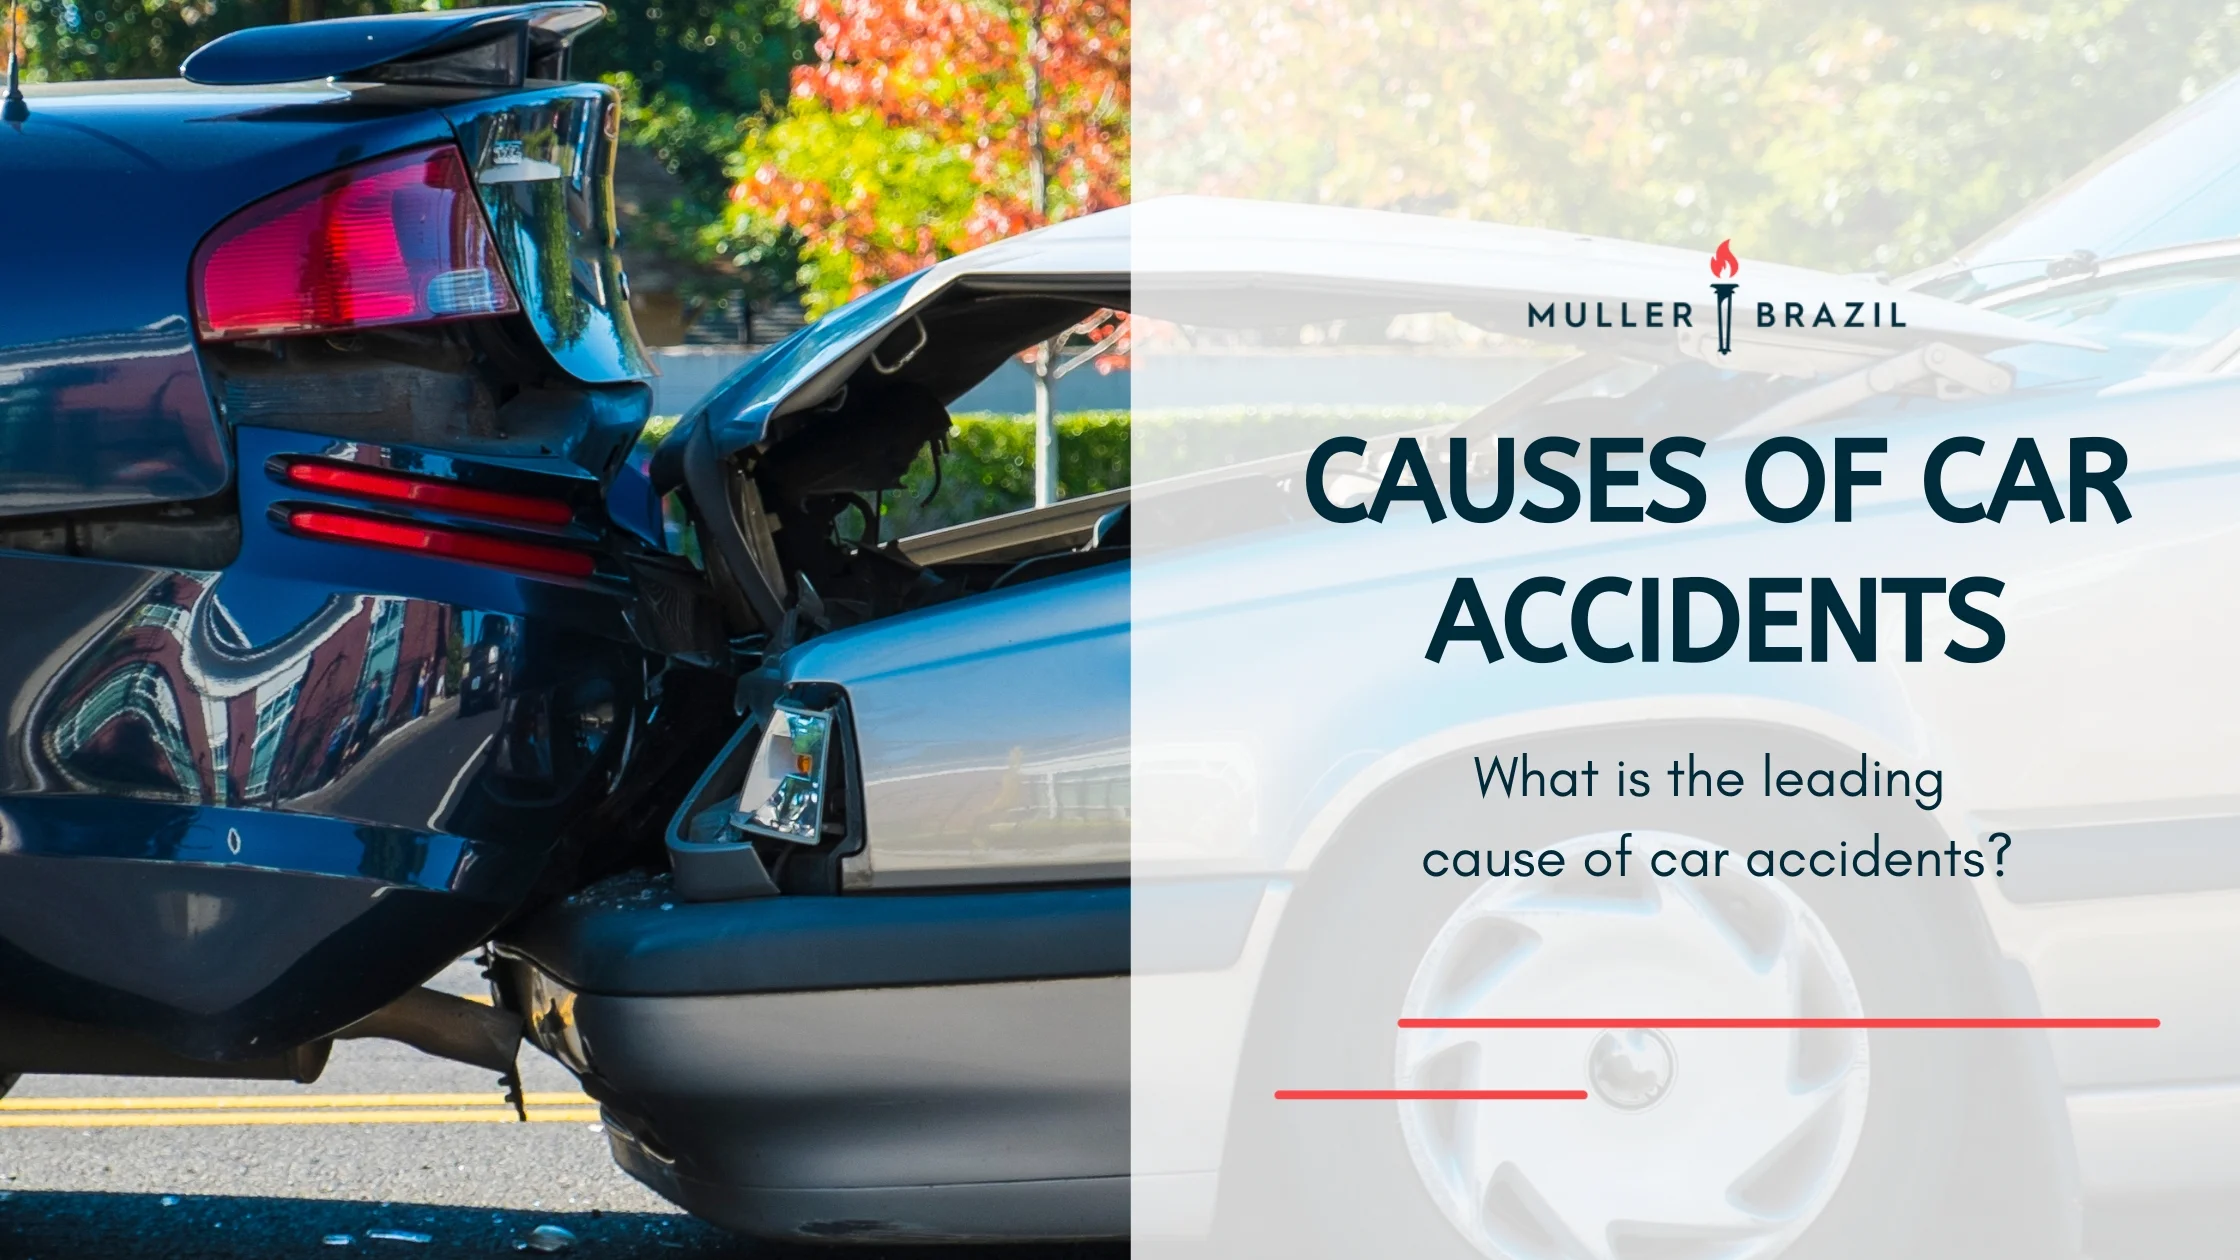 The Top 25 Most Common Causes of Car Accidents